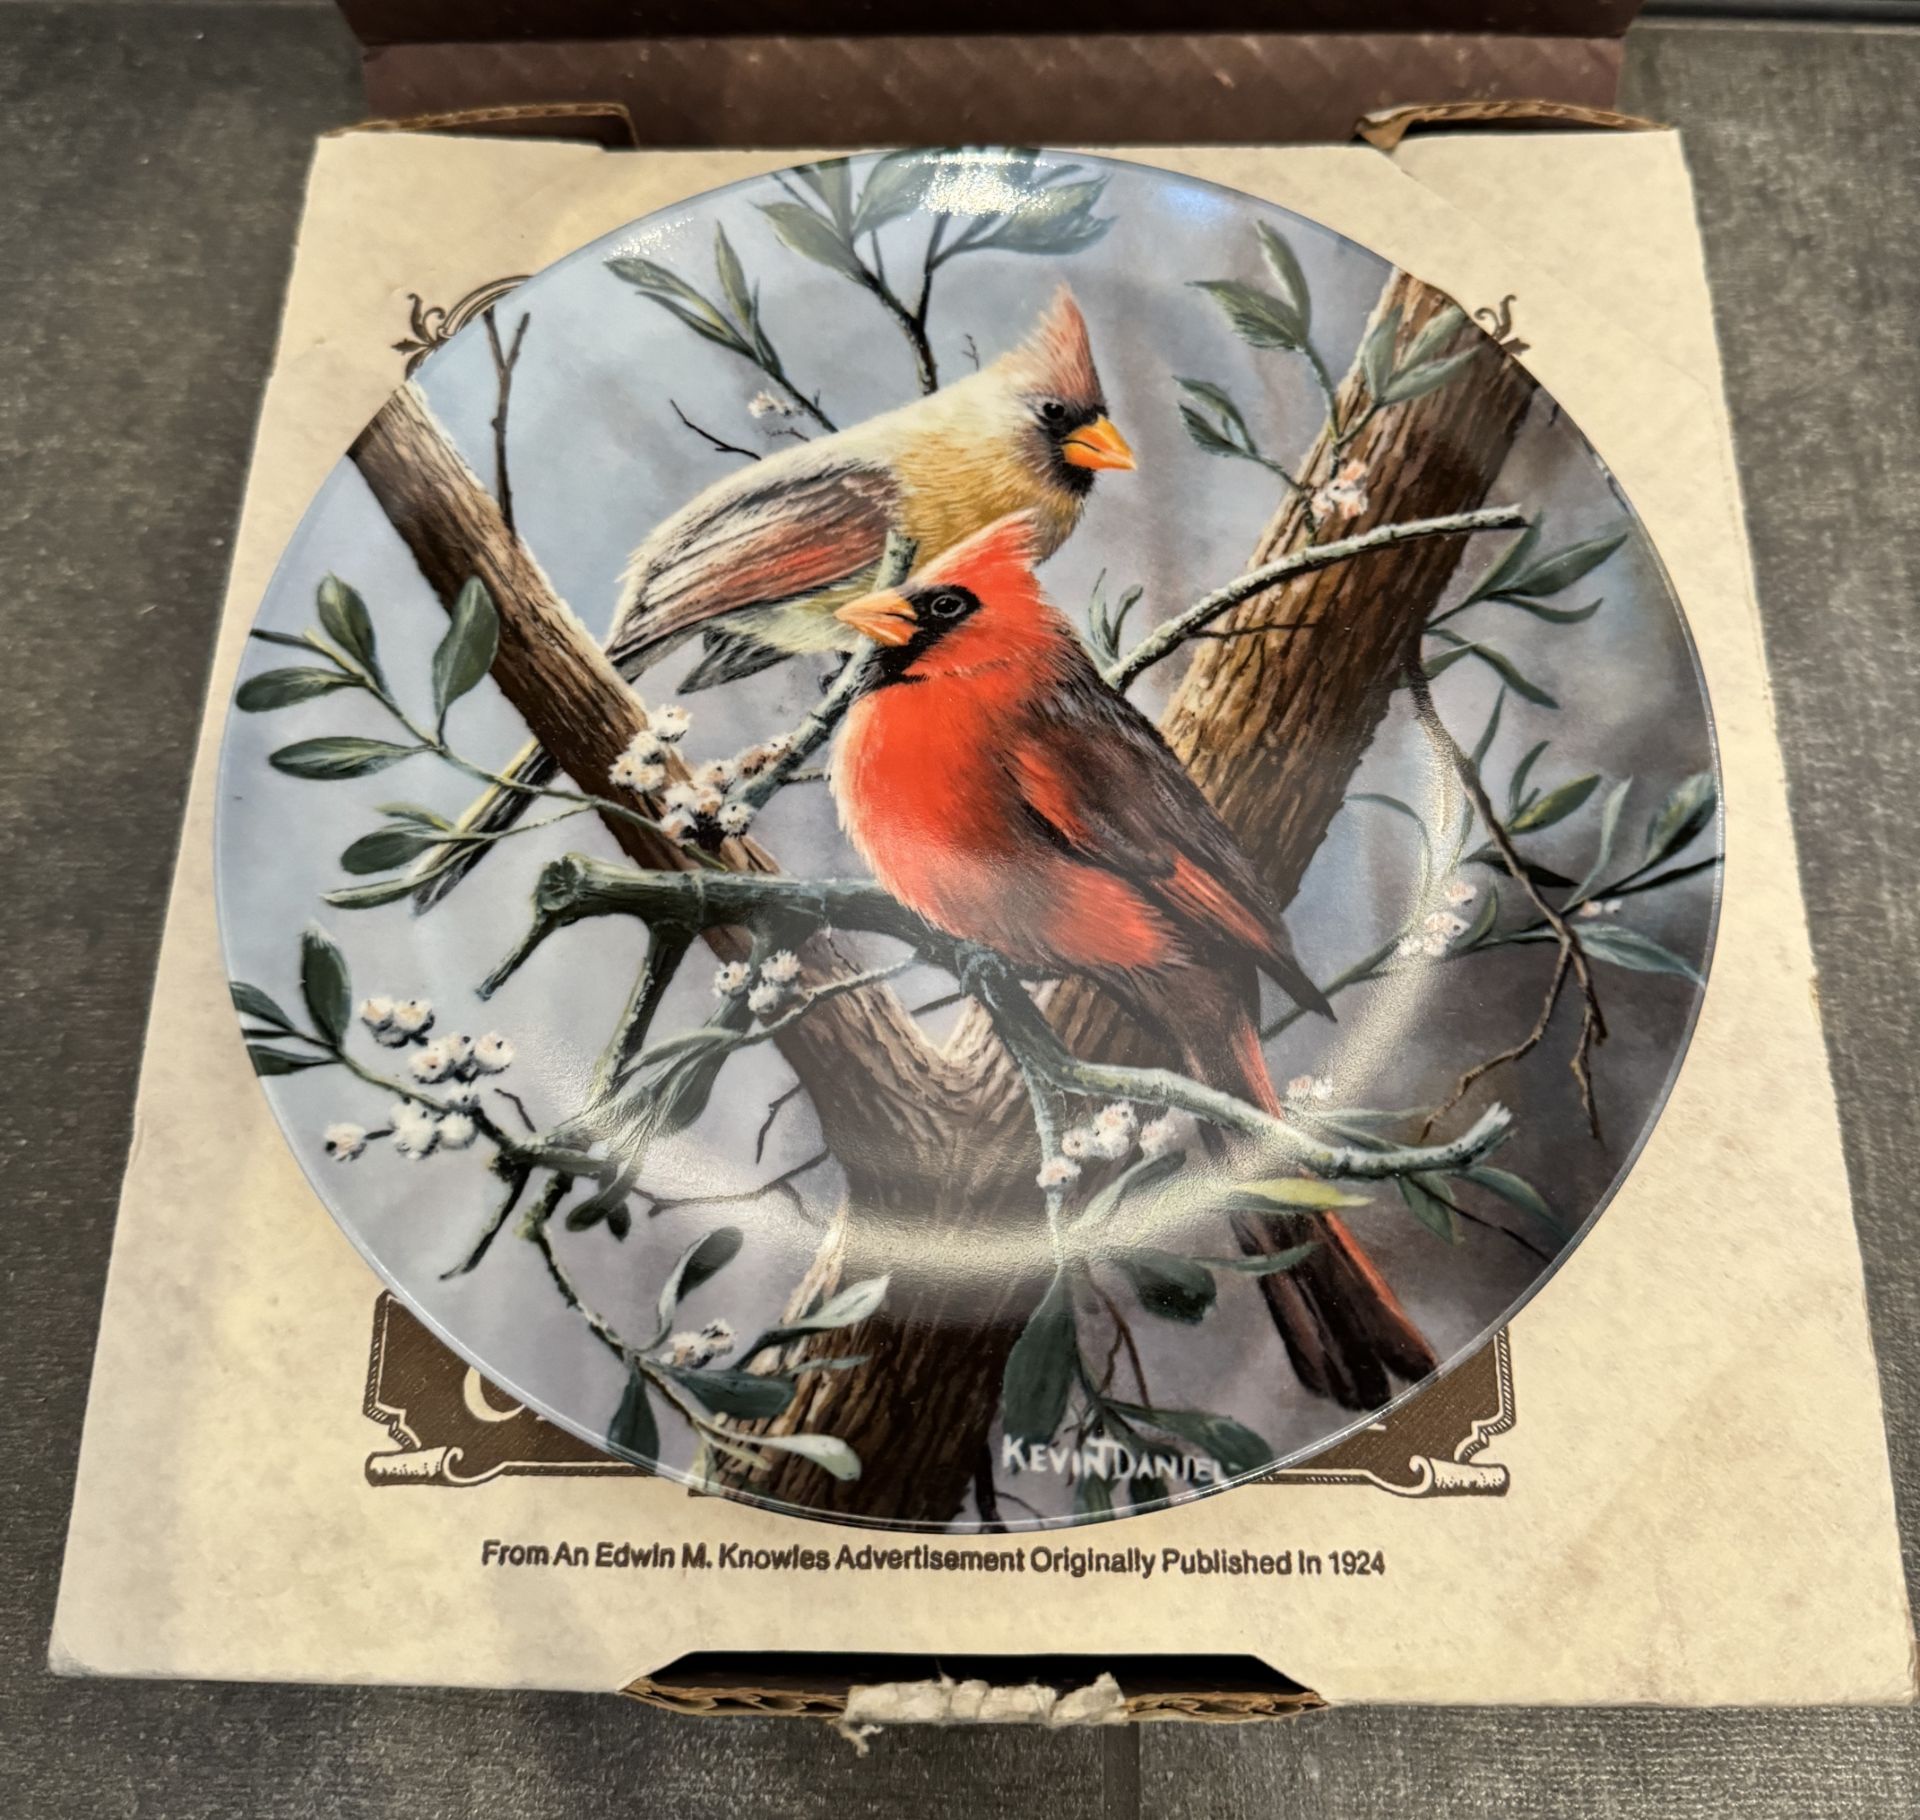 COLLECTIBLE CERAMIC PLATE - KEVIN DANIEL PAINT - IN ORIGINAL BOX WITH PAPERS - Image 2 of 2